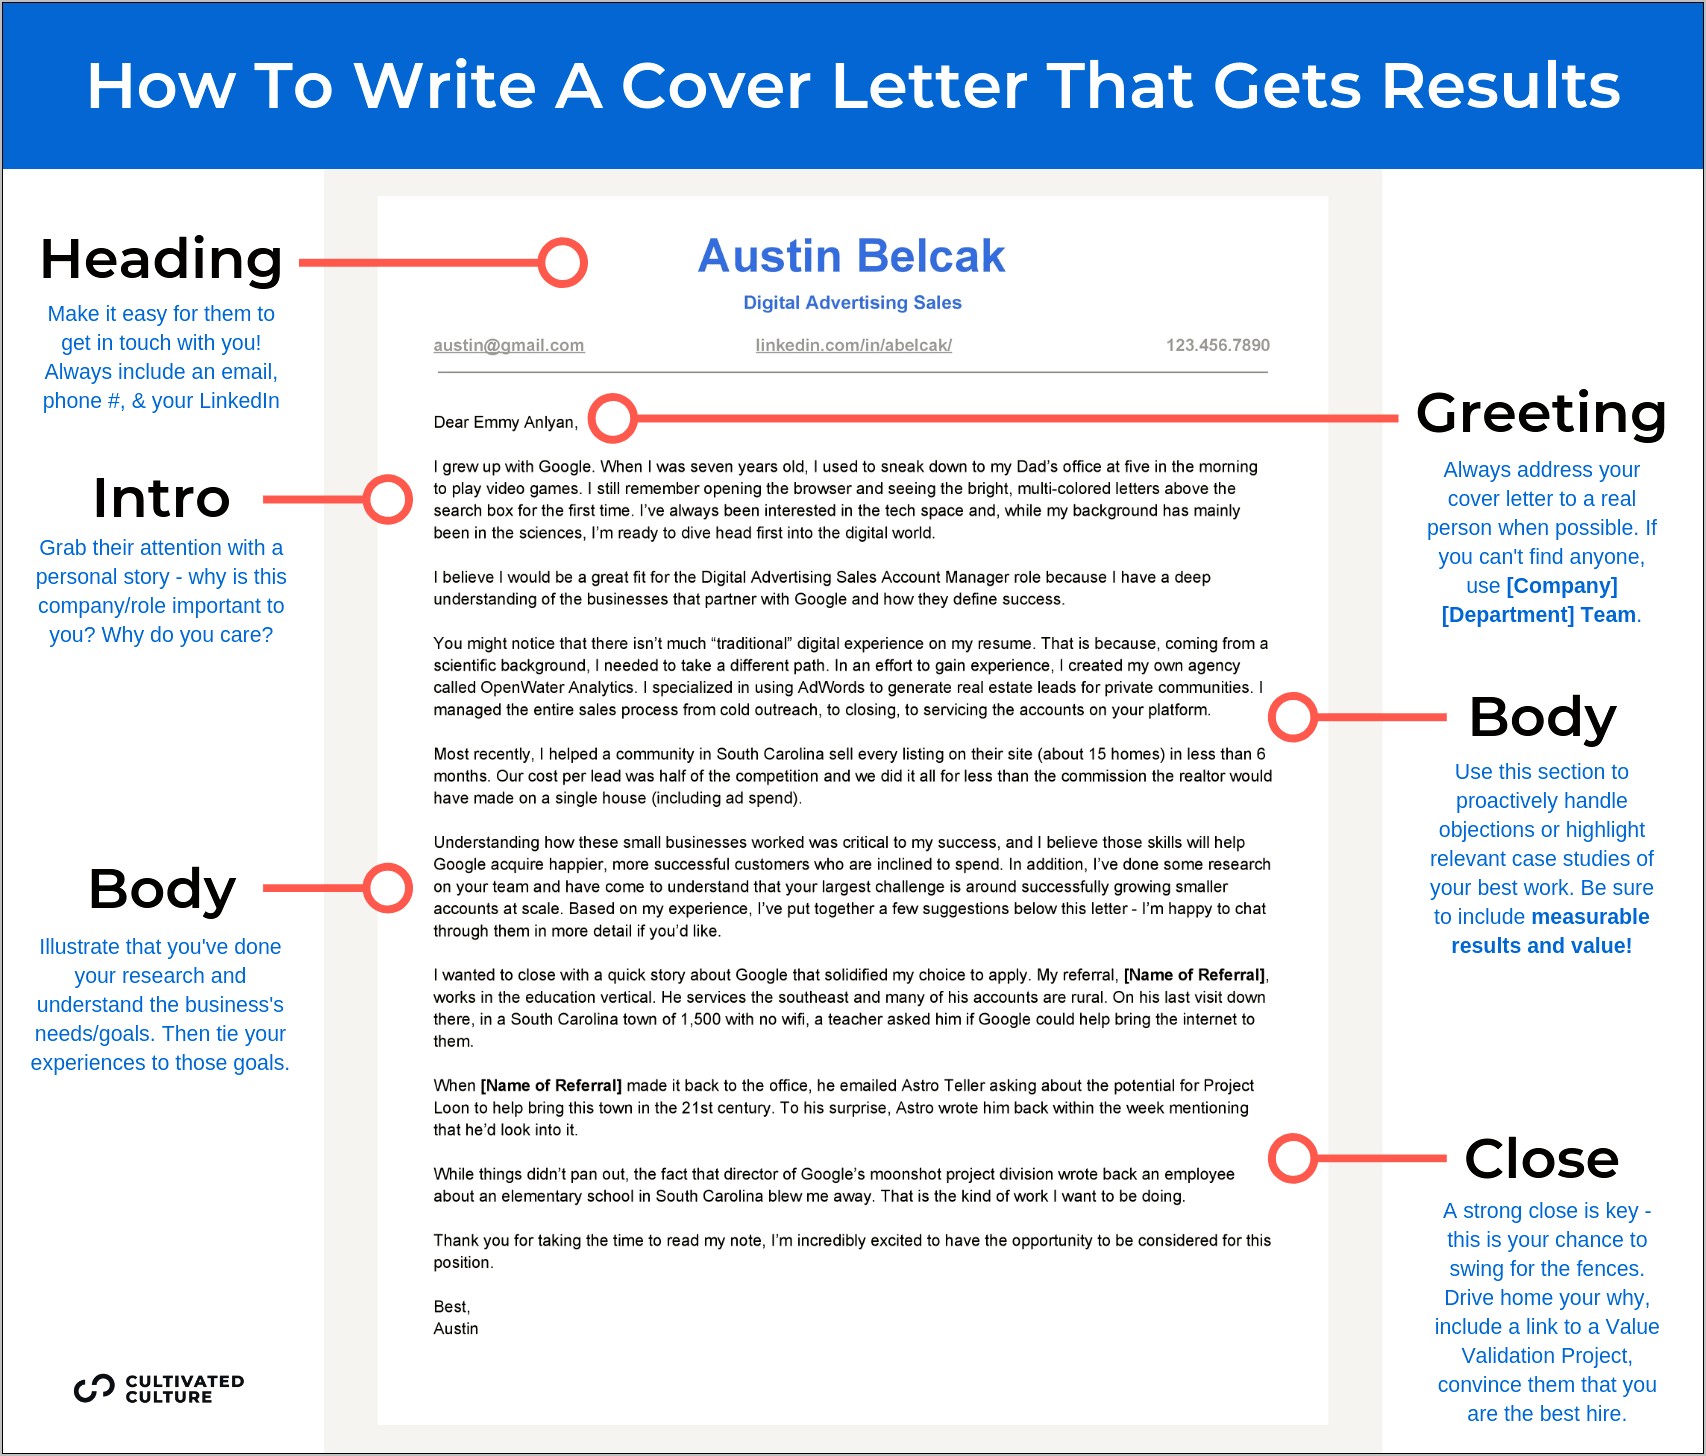 should your cover letter match your resume